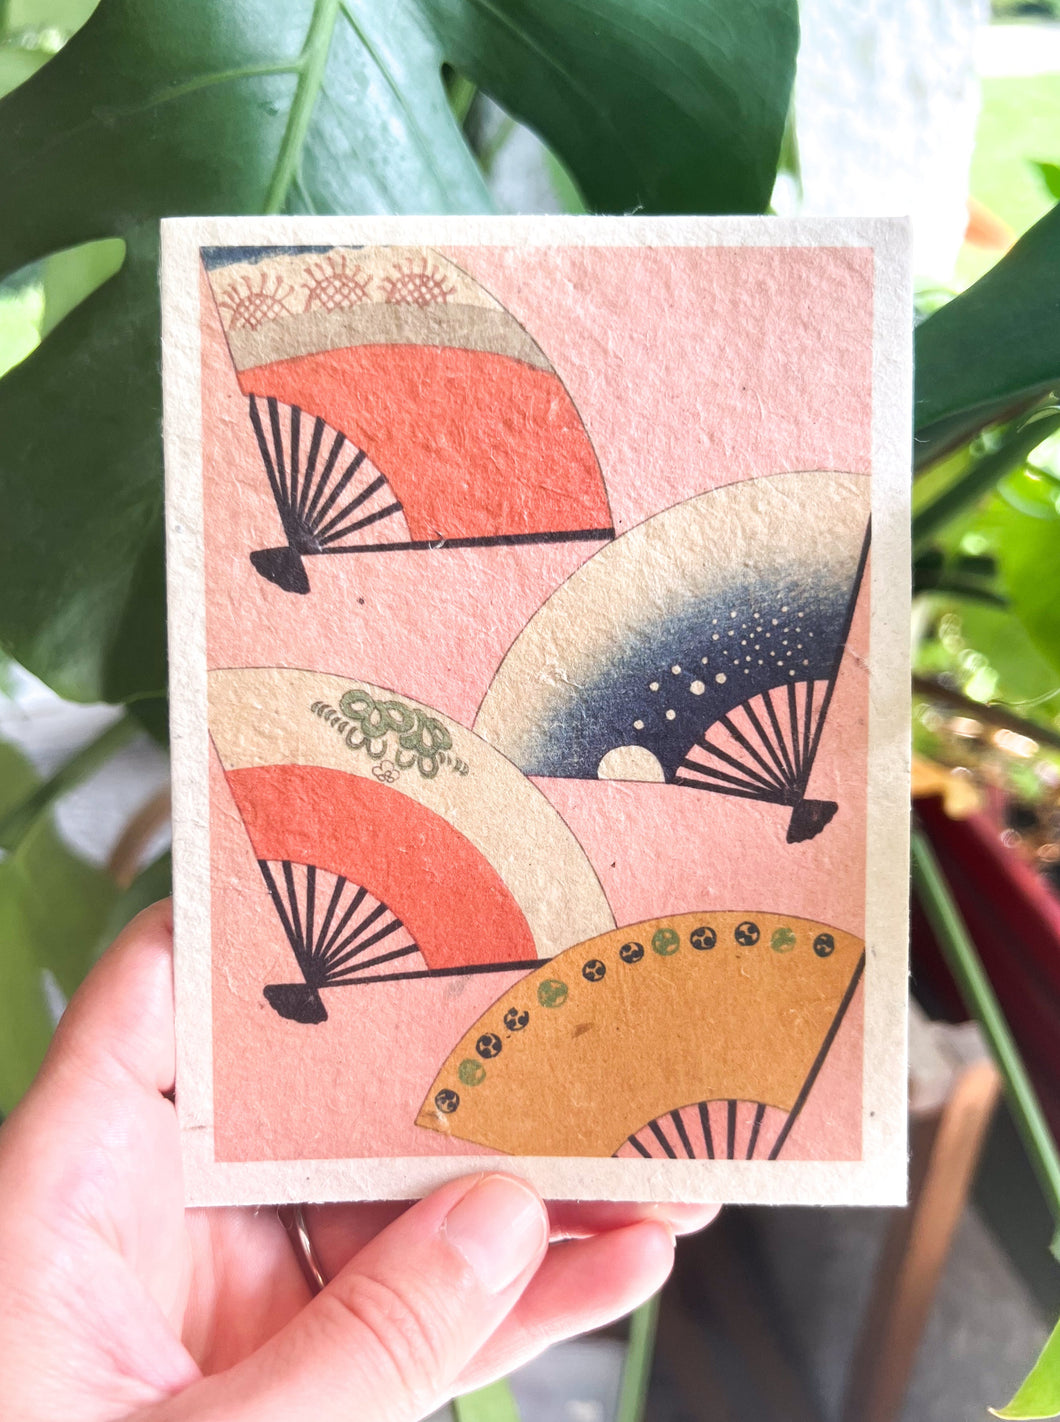 Japanese Plantable Seed Card || Zero Waste || Supports Women || Eco-friendly || J35